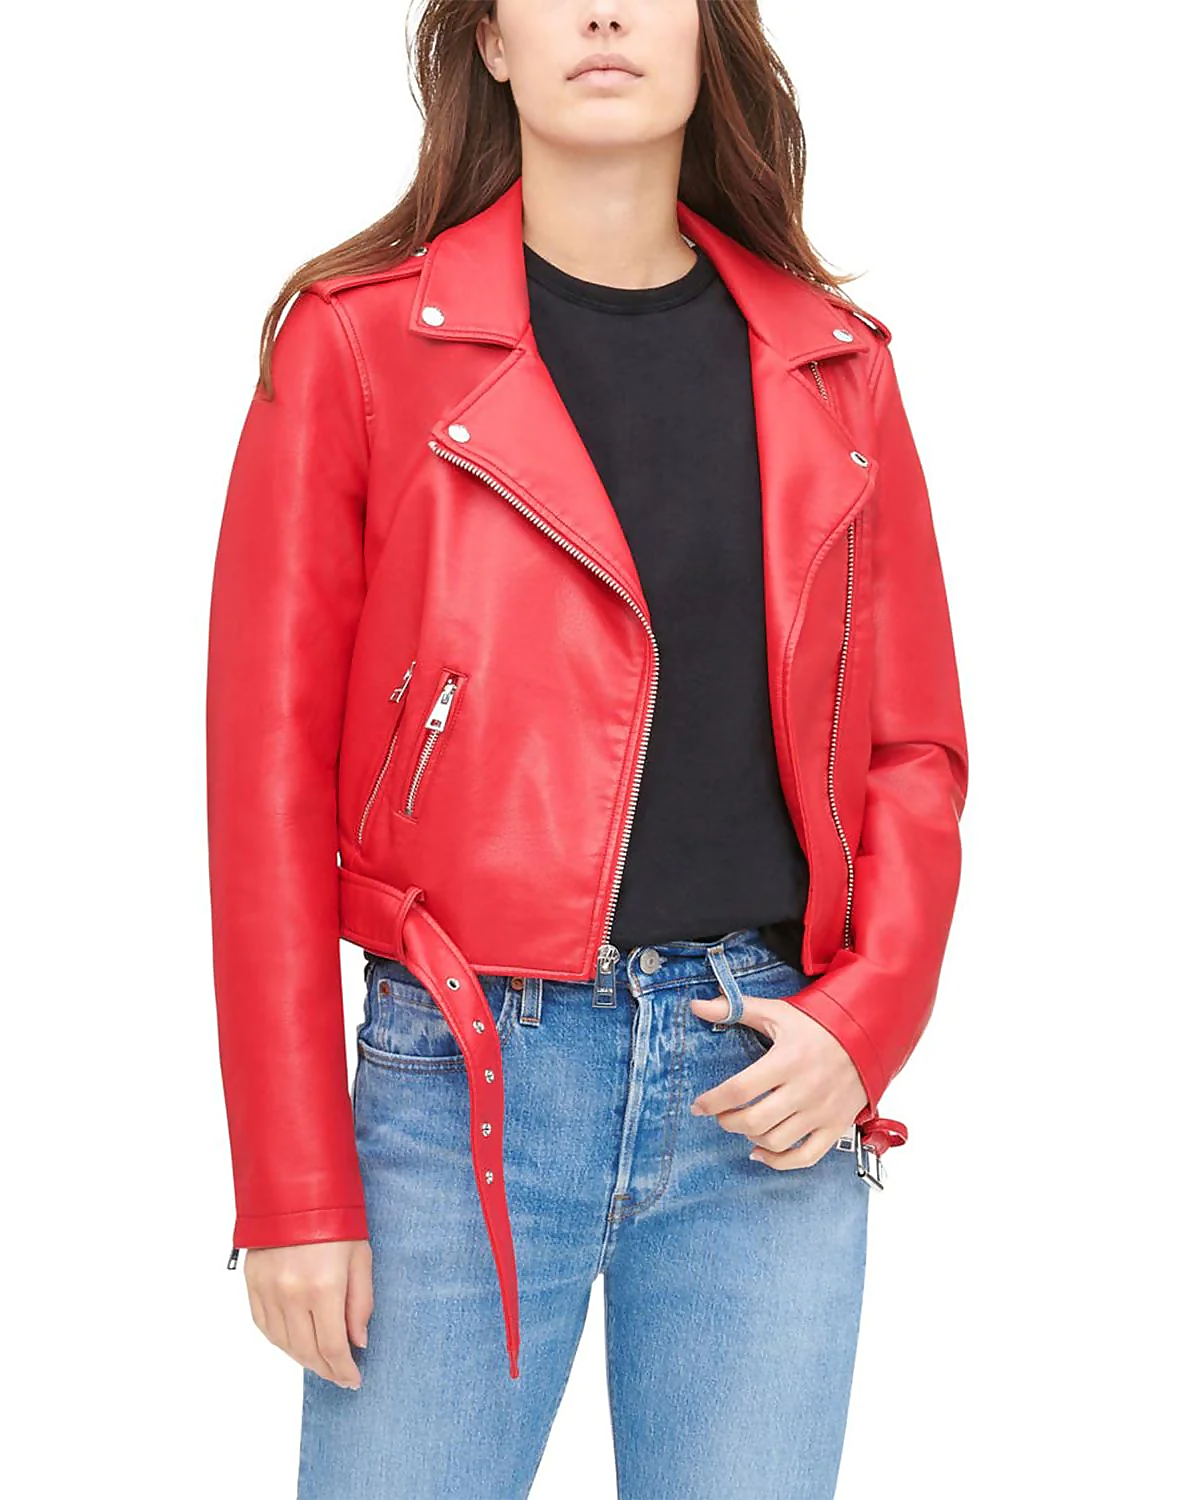 Why Should Every Woman Own a Red Biker Jacket?